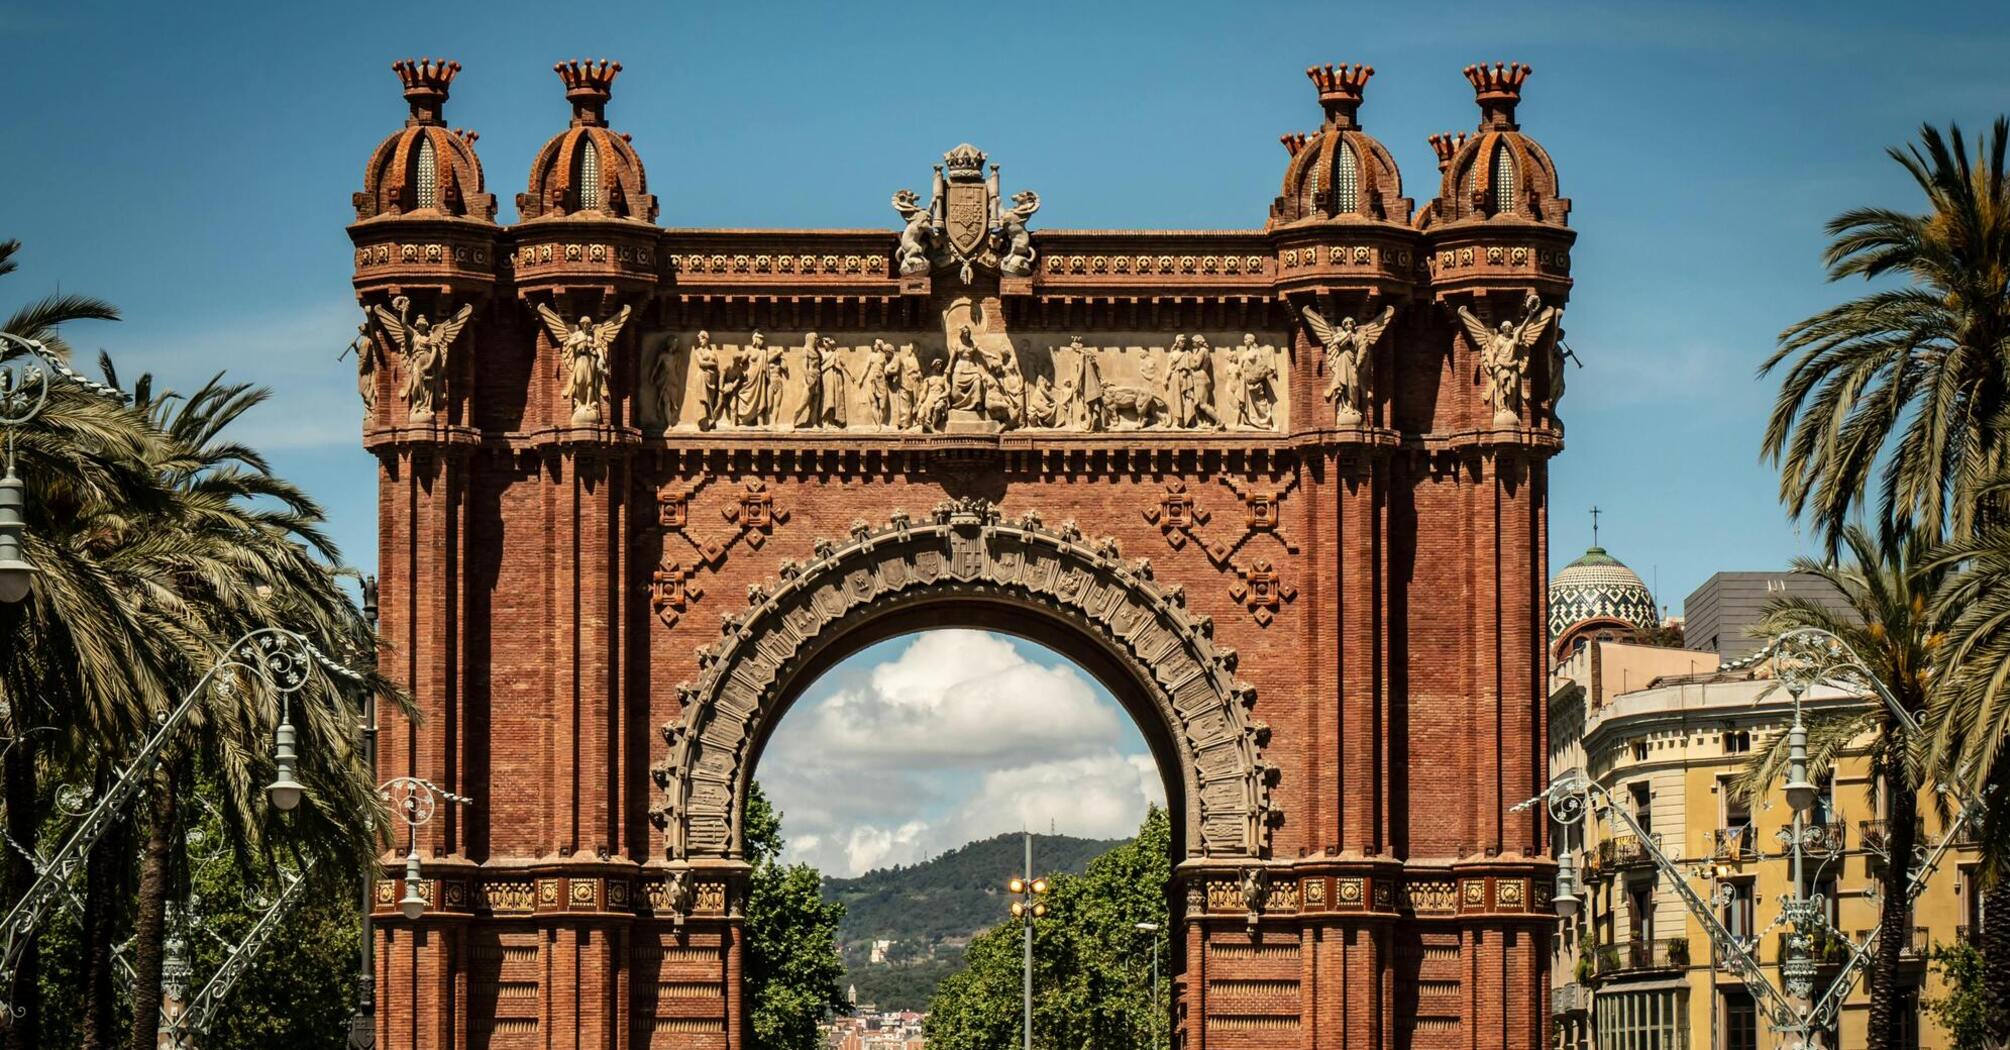 Barcelona has joined Spain's war on tourists: the mayor promises to expel AirBnb from the city by 2029. What is known